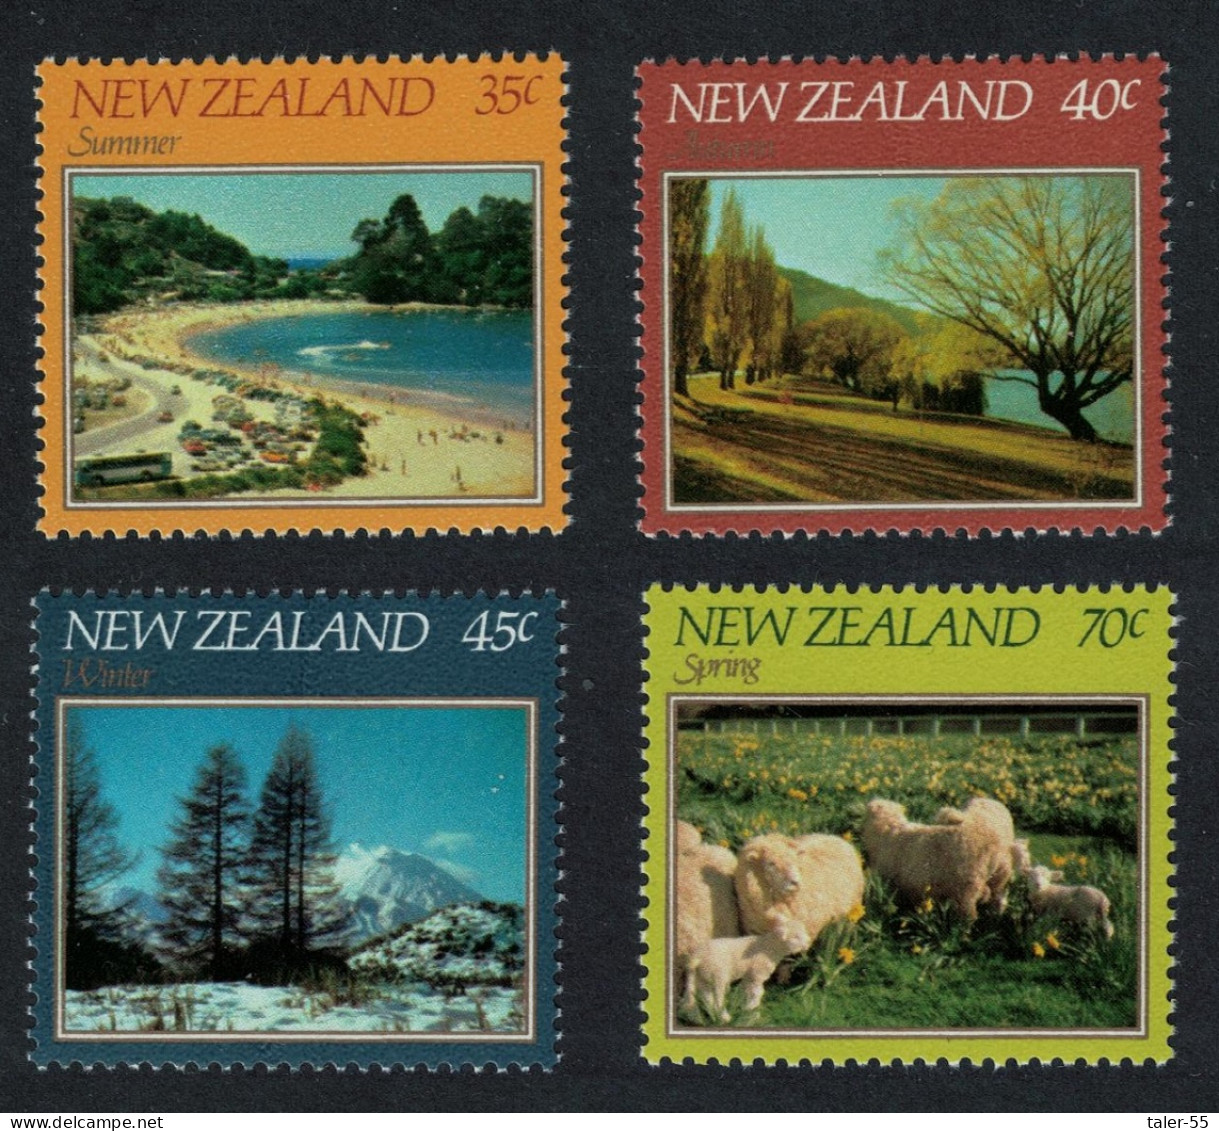 New Zealand Sheep Mountains Scenes 4v 1982 MNH SG#1266-1269 - Unused Stamps